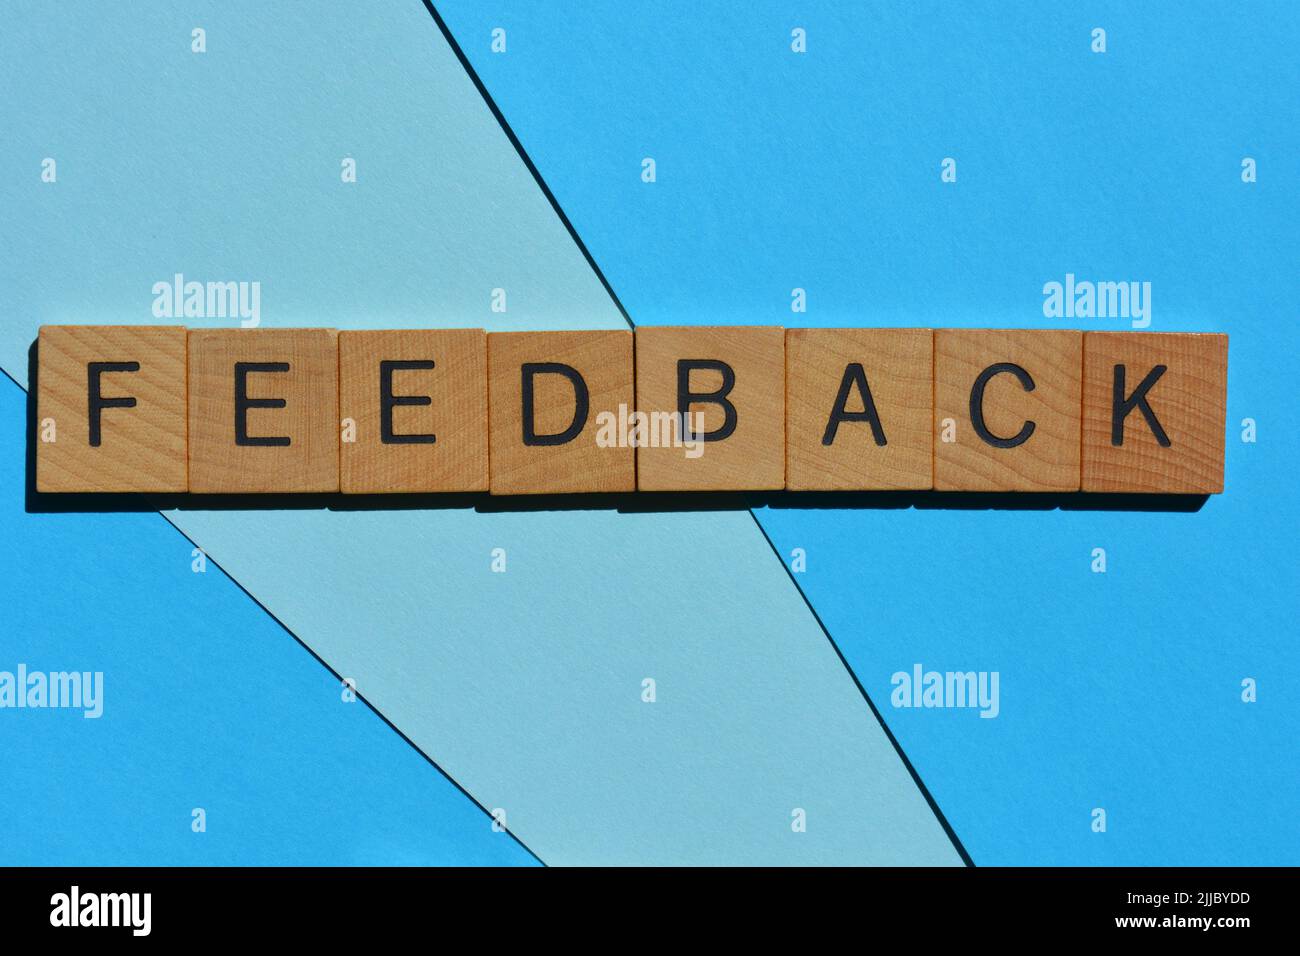 Feedback, word in wooden alphabet letters isolated on blue background Stock Photo